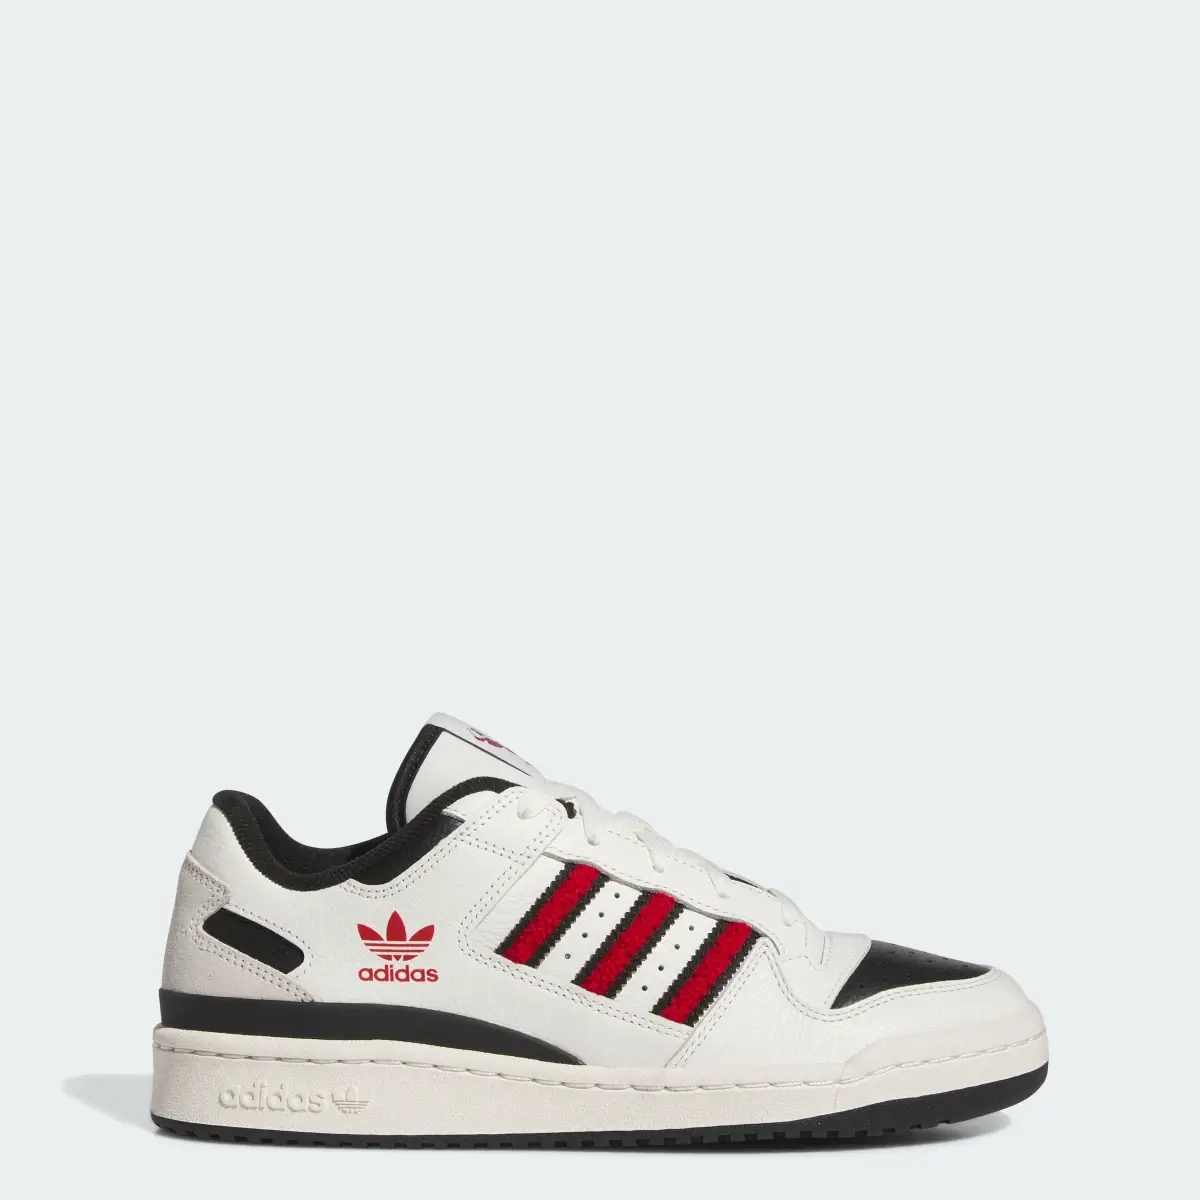 Adidas Louisville Forum Low Shoes. 1